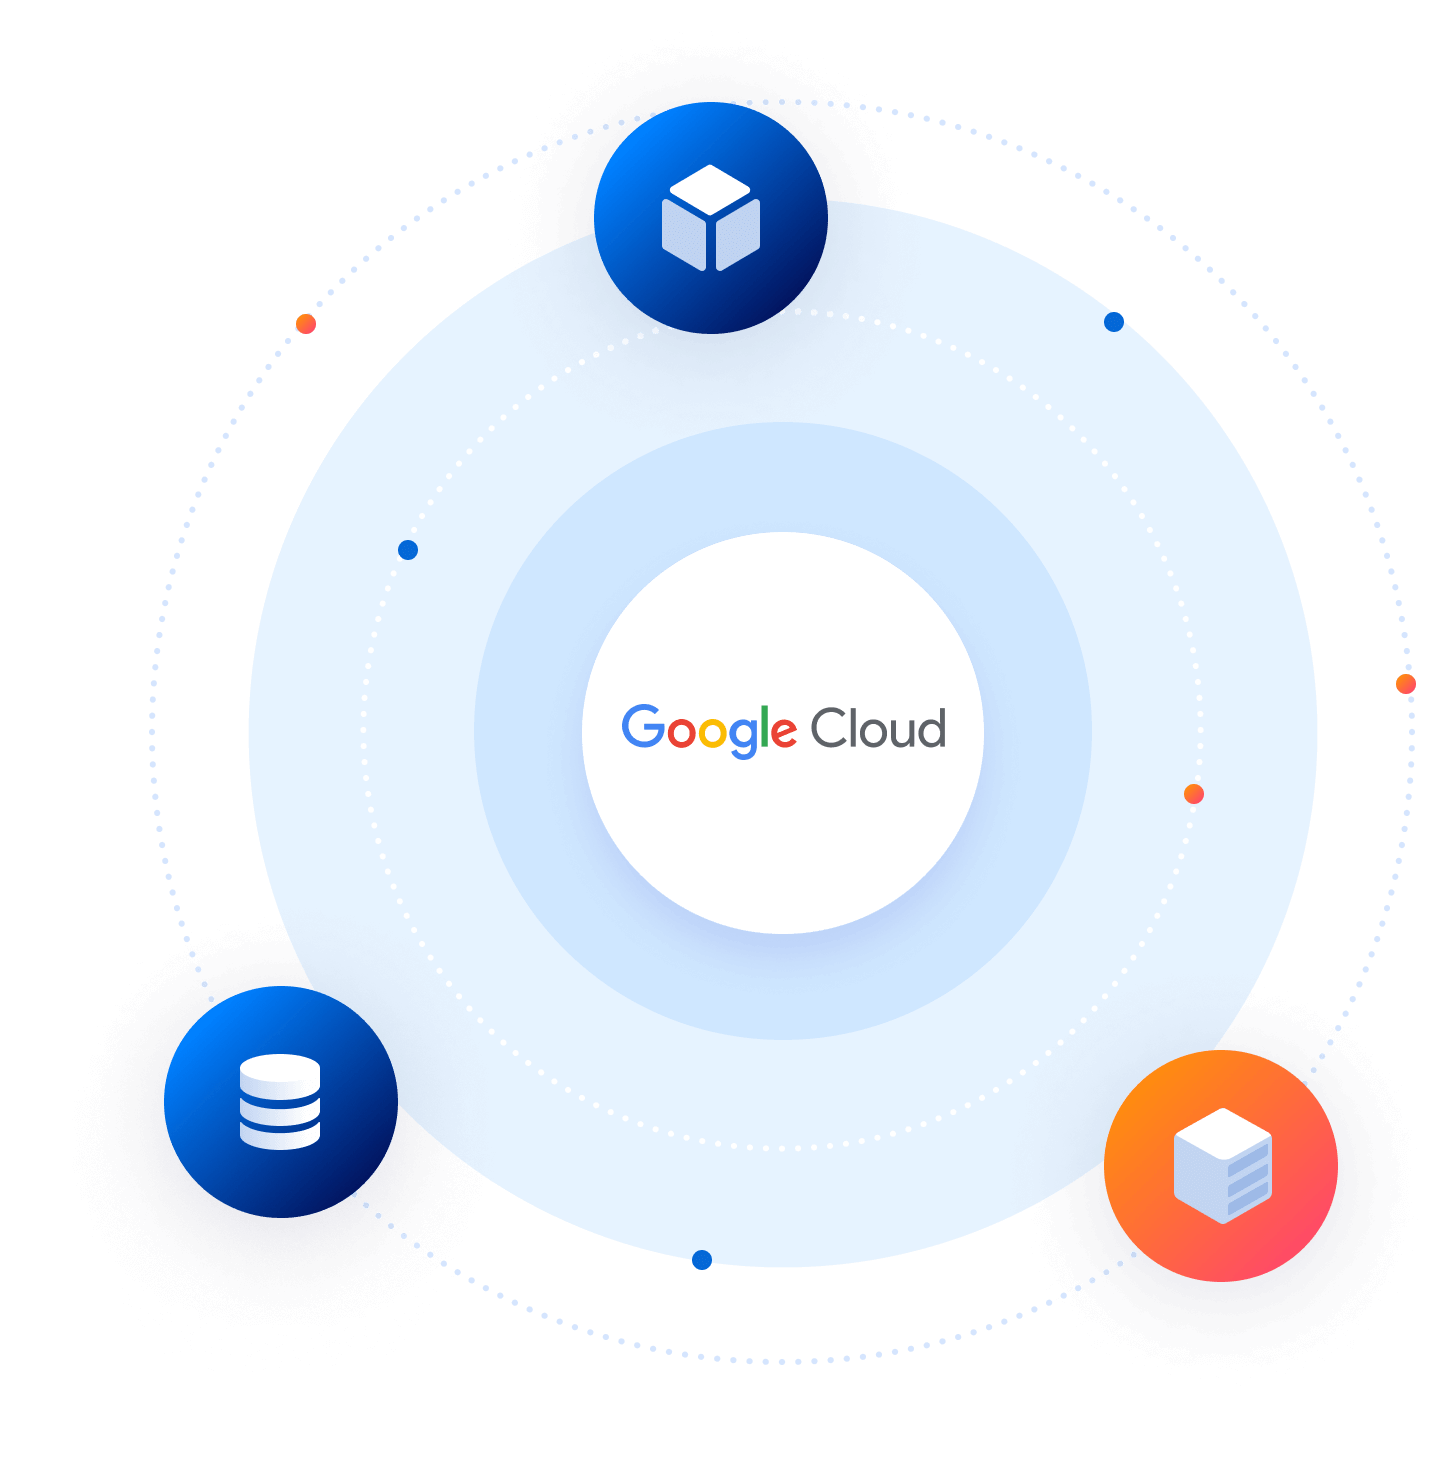 Agentless security for Google Cloud